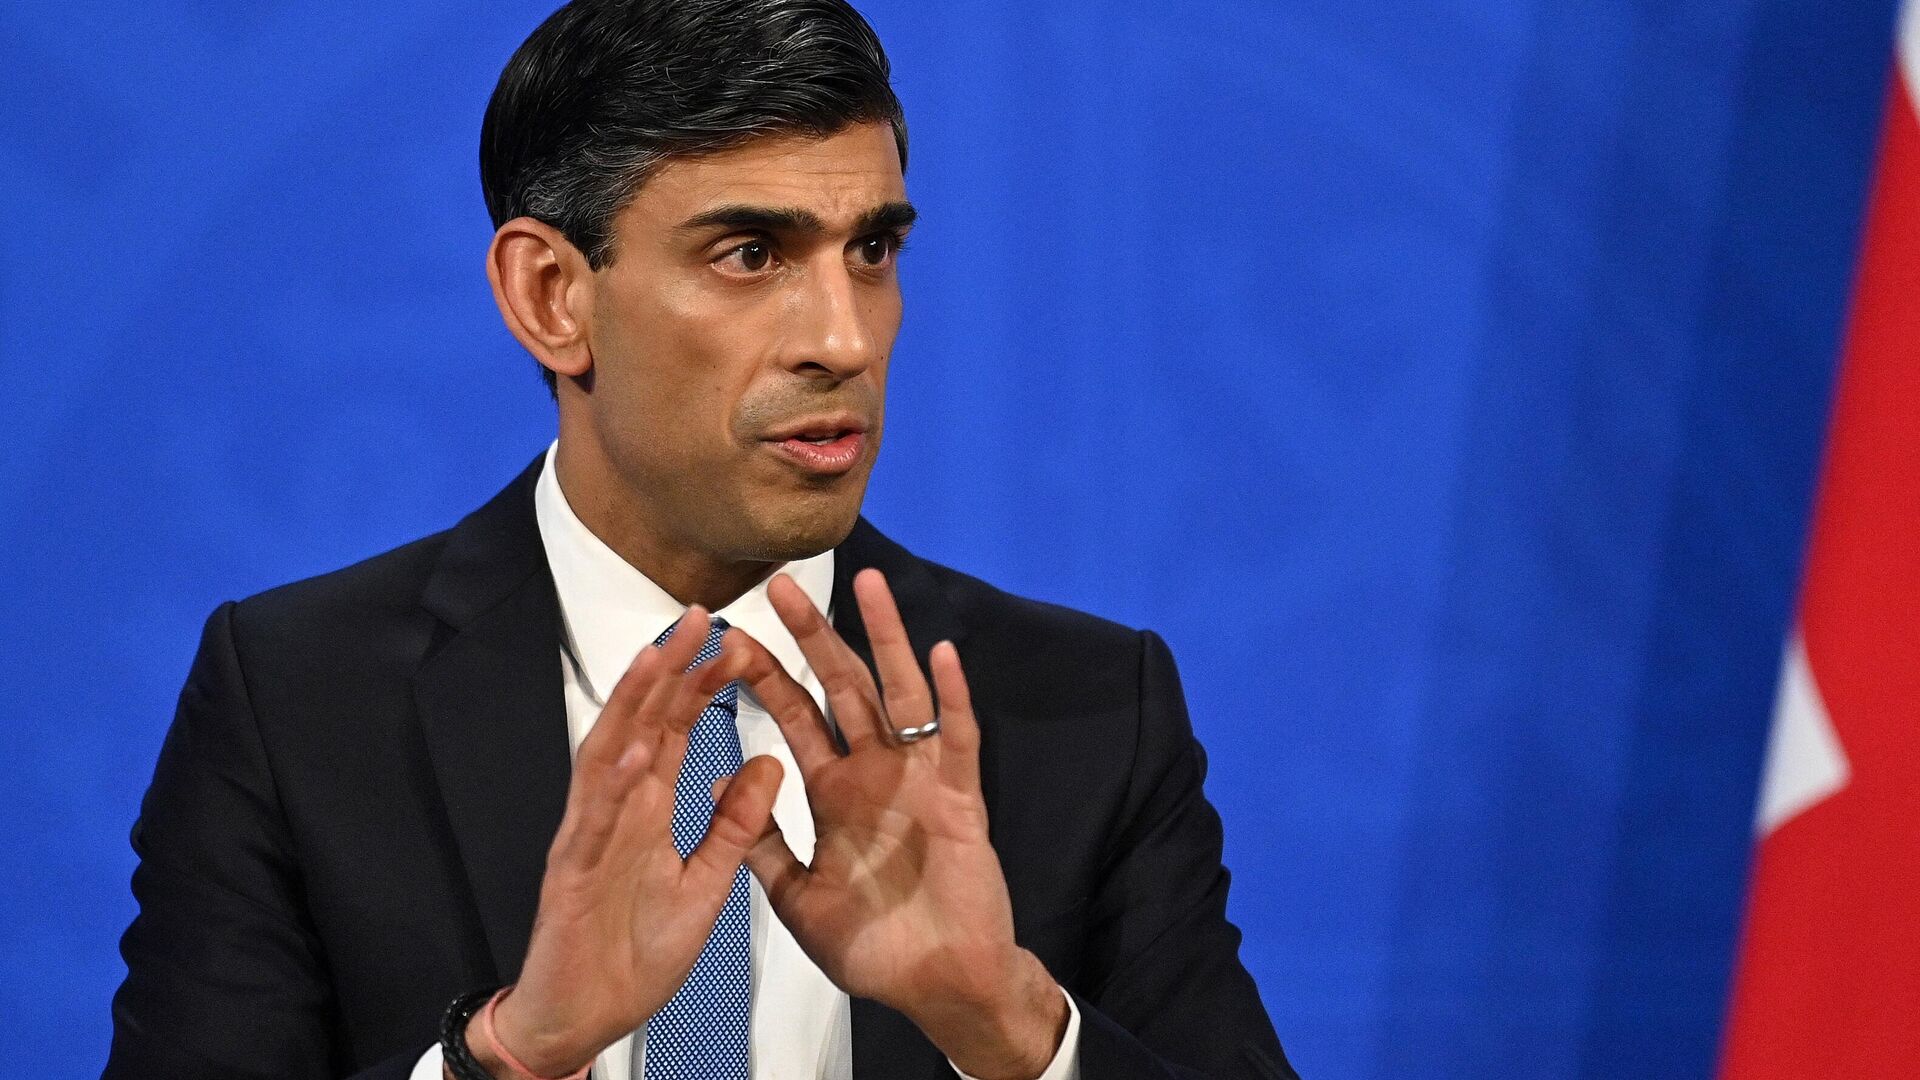 Britain's Chancellor of the Exchequer Rishi Sunak hosts a press conference in the Downing Street Briefing Room on February 3, 2022 - Sputnik International, 1920, 23.03.2022